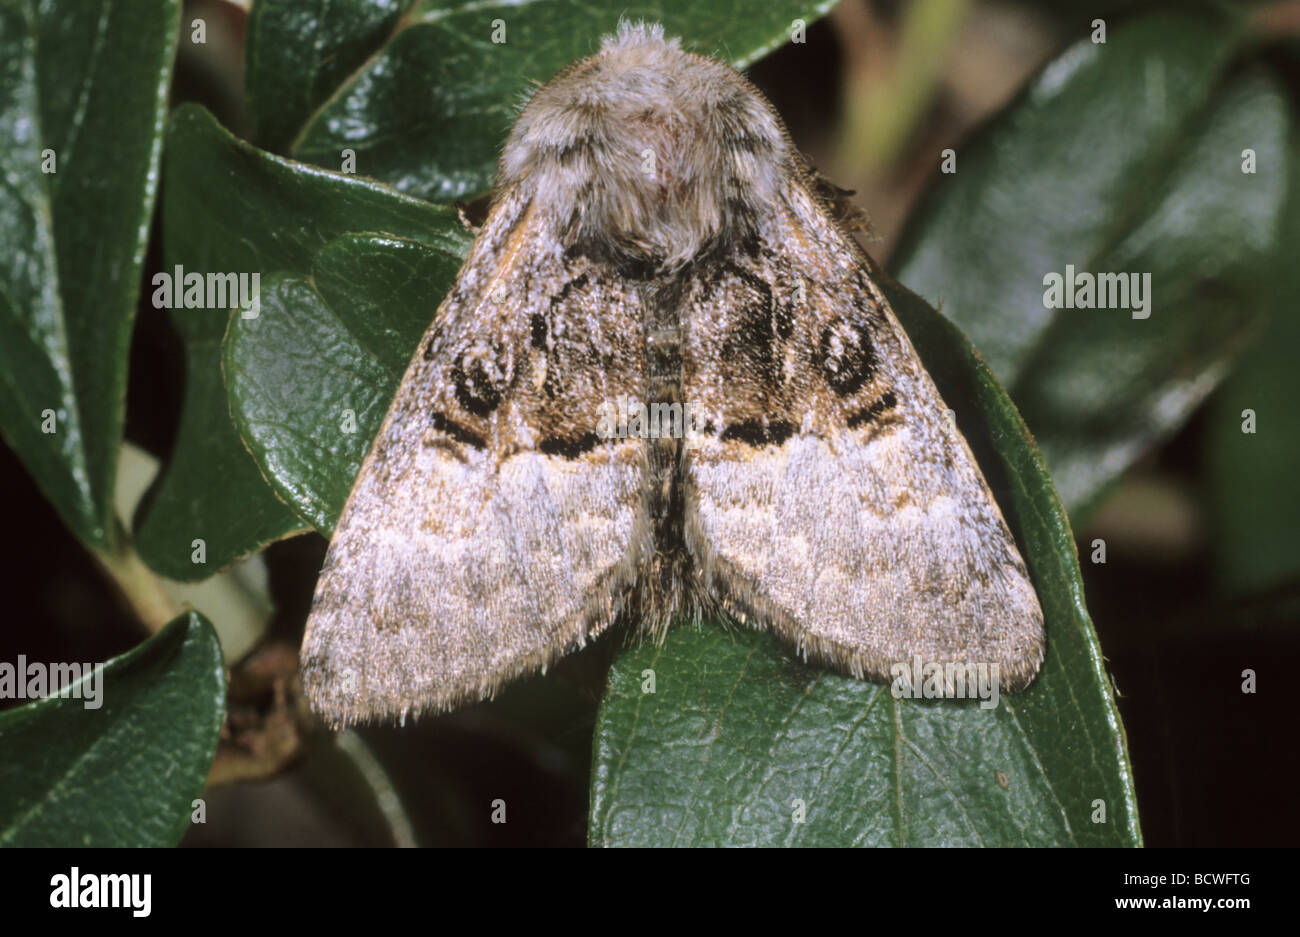 Nut-tree tussock (Colocasia coryli) in resting position Stock Photo